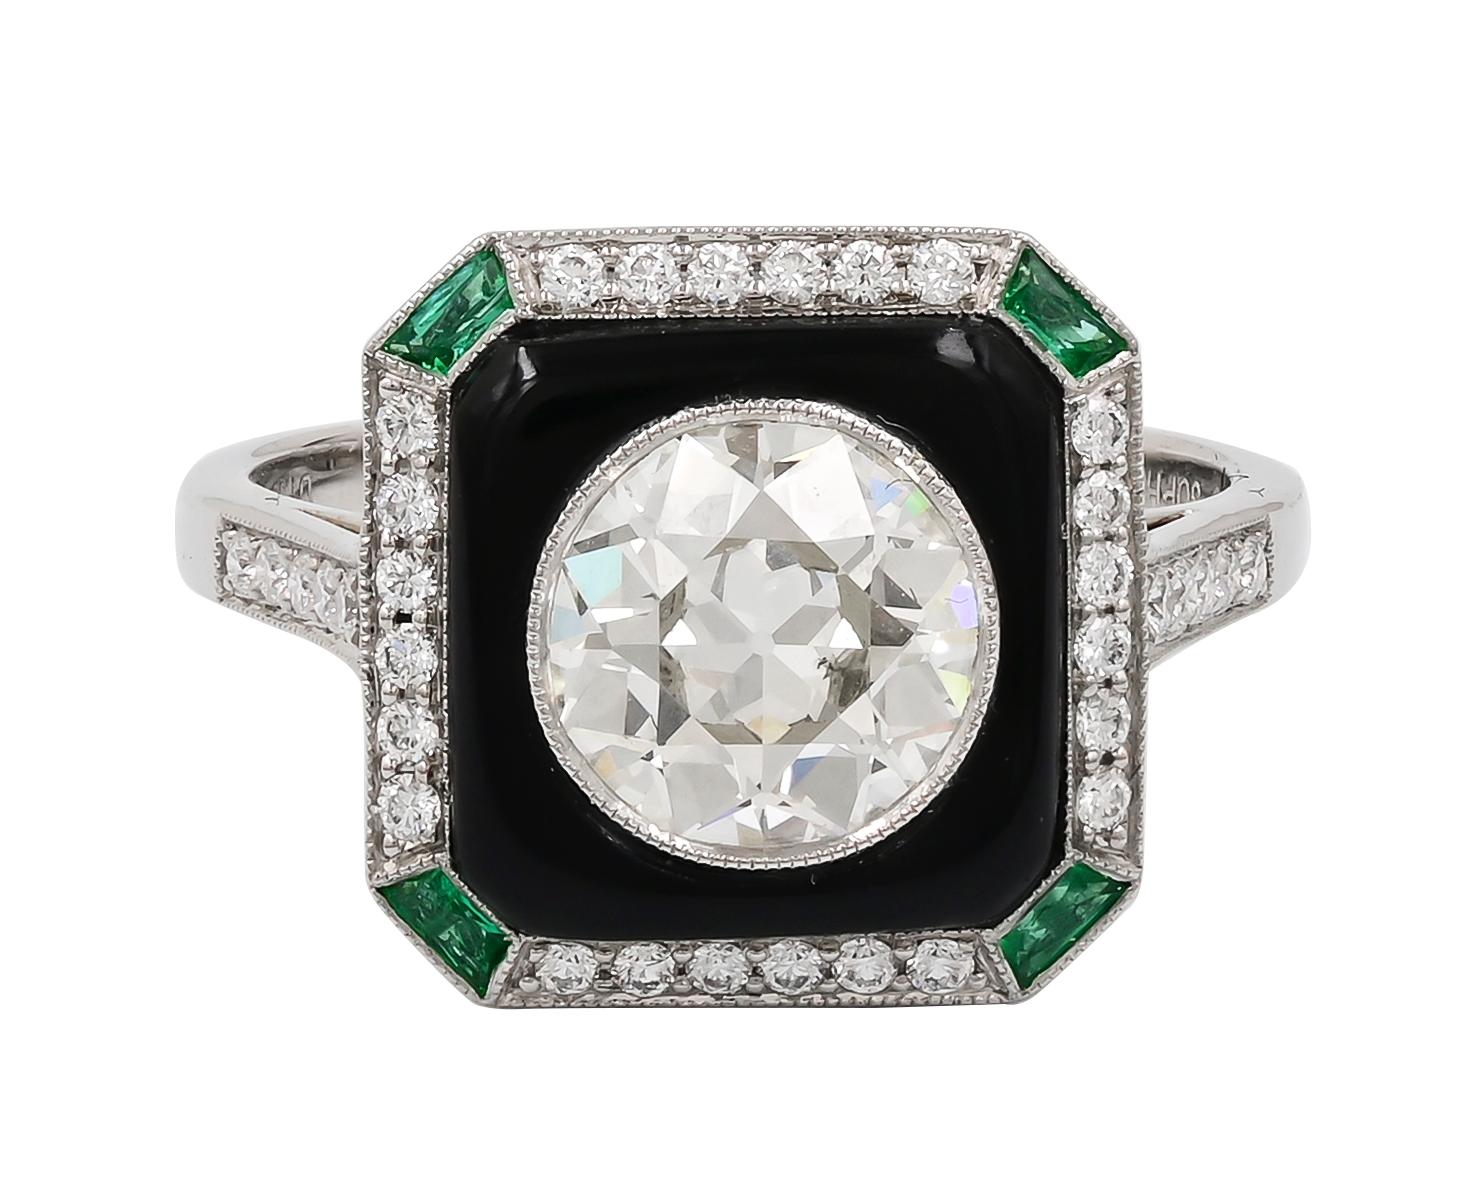 Art Deco platinum ring by Sophia D. The ring features a 1.38 carats round center diamond accented with 4 emeralds that weigh approximately 0.70 carats, 1.38 carats onyx and 0.20 carats diamonds. Ring size is a 6 and available for resizing. 



